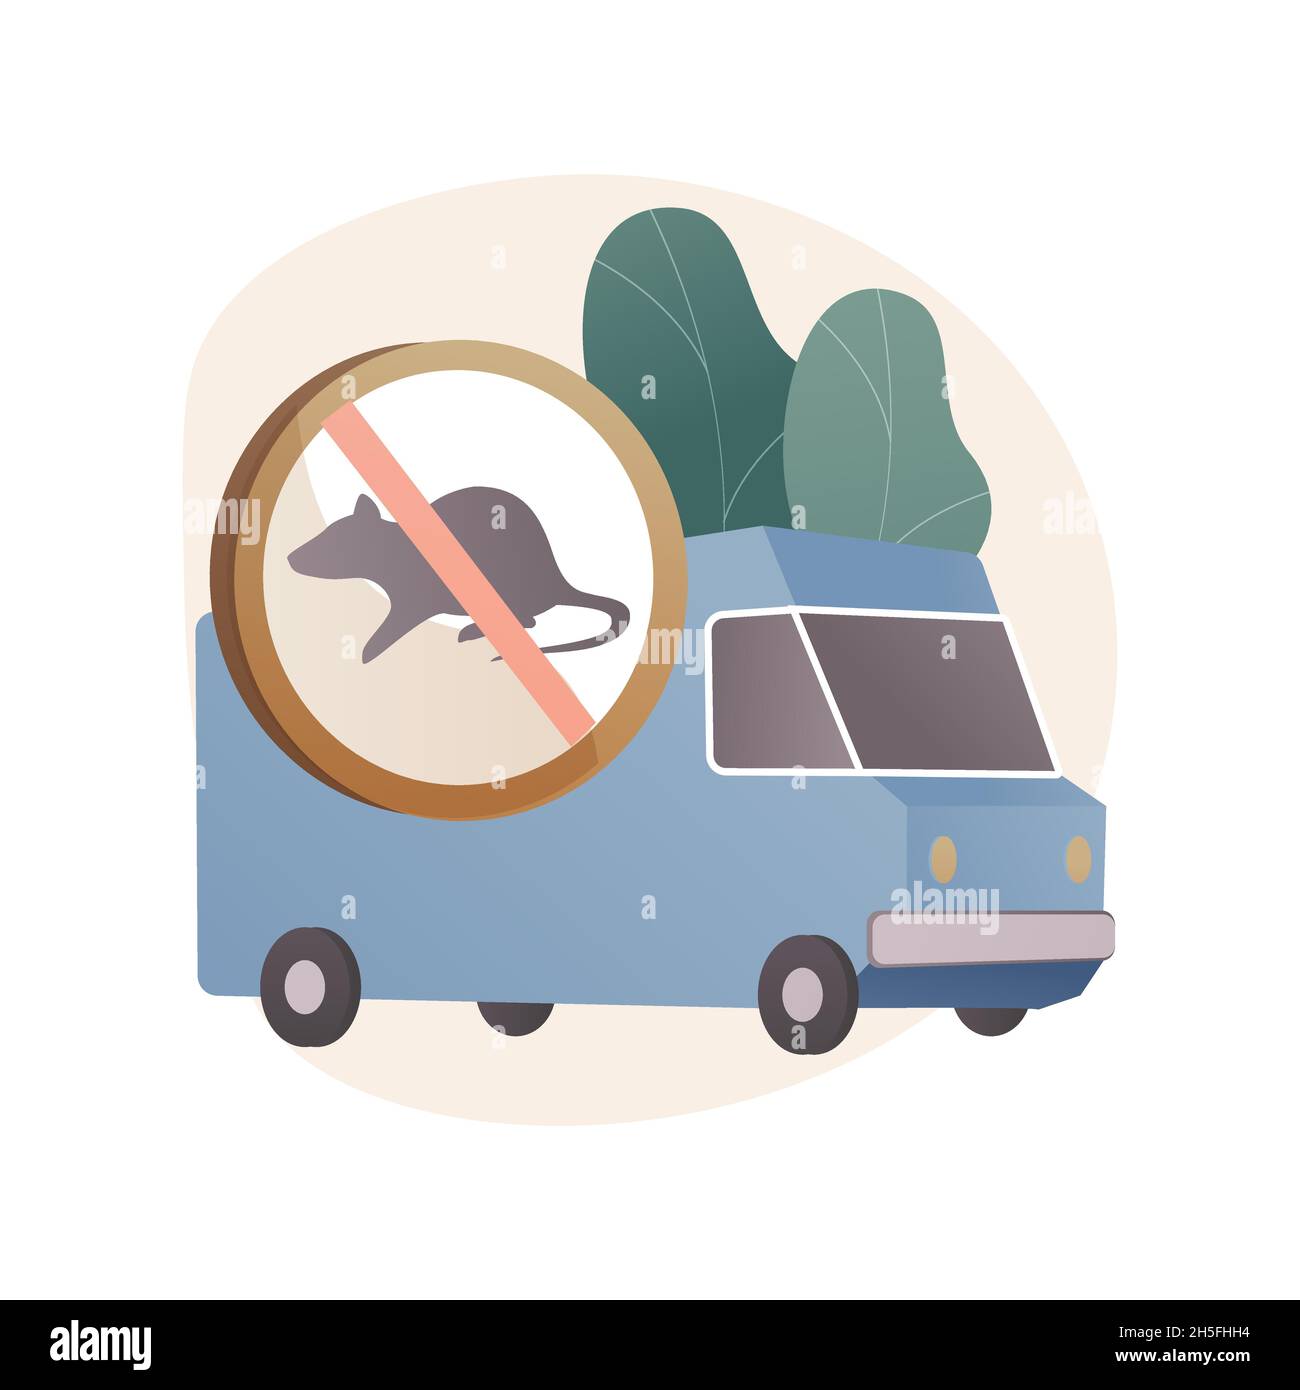 Rodents pest control service abstract concept vector illustration. Stock Vector